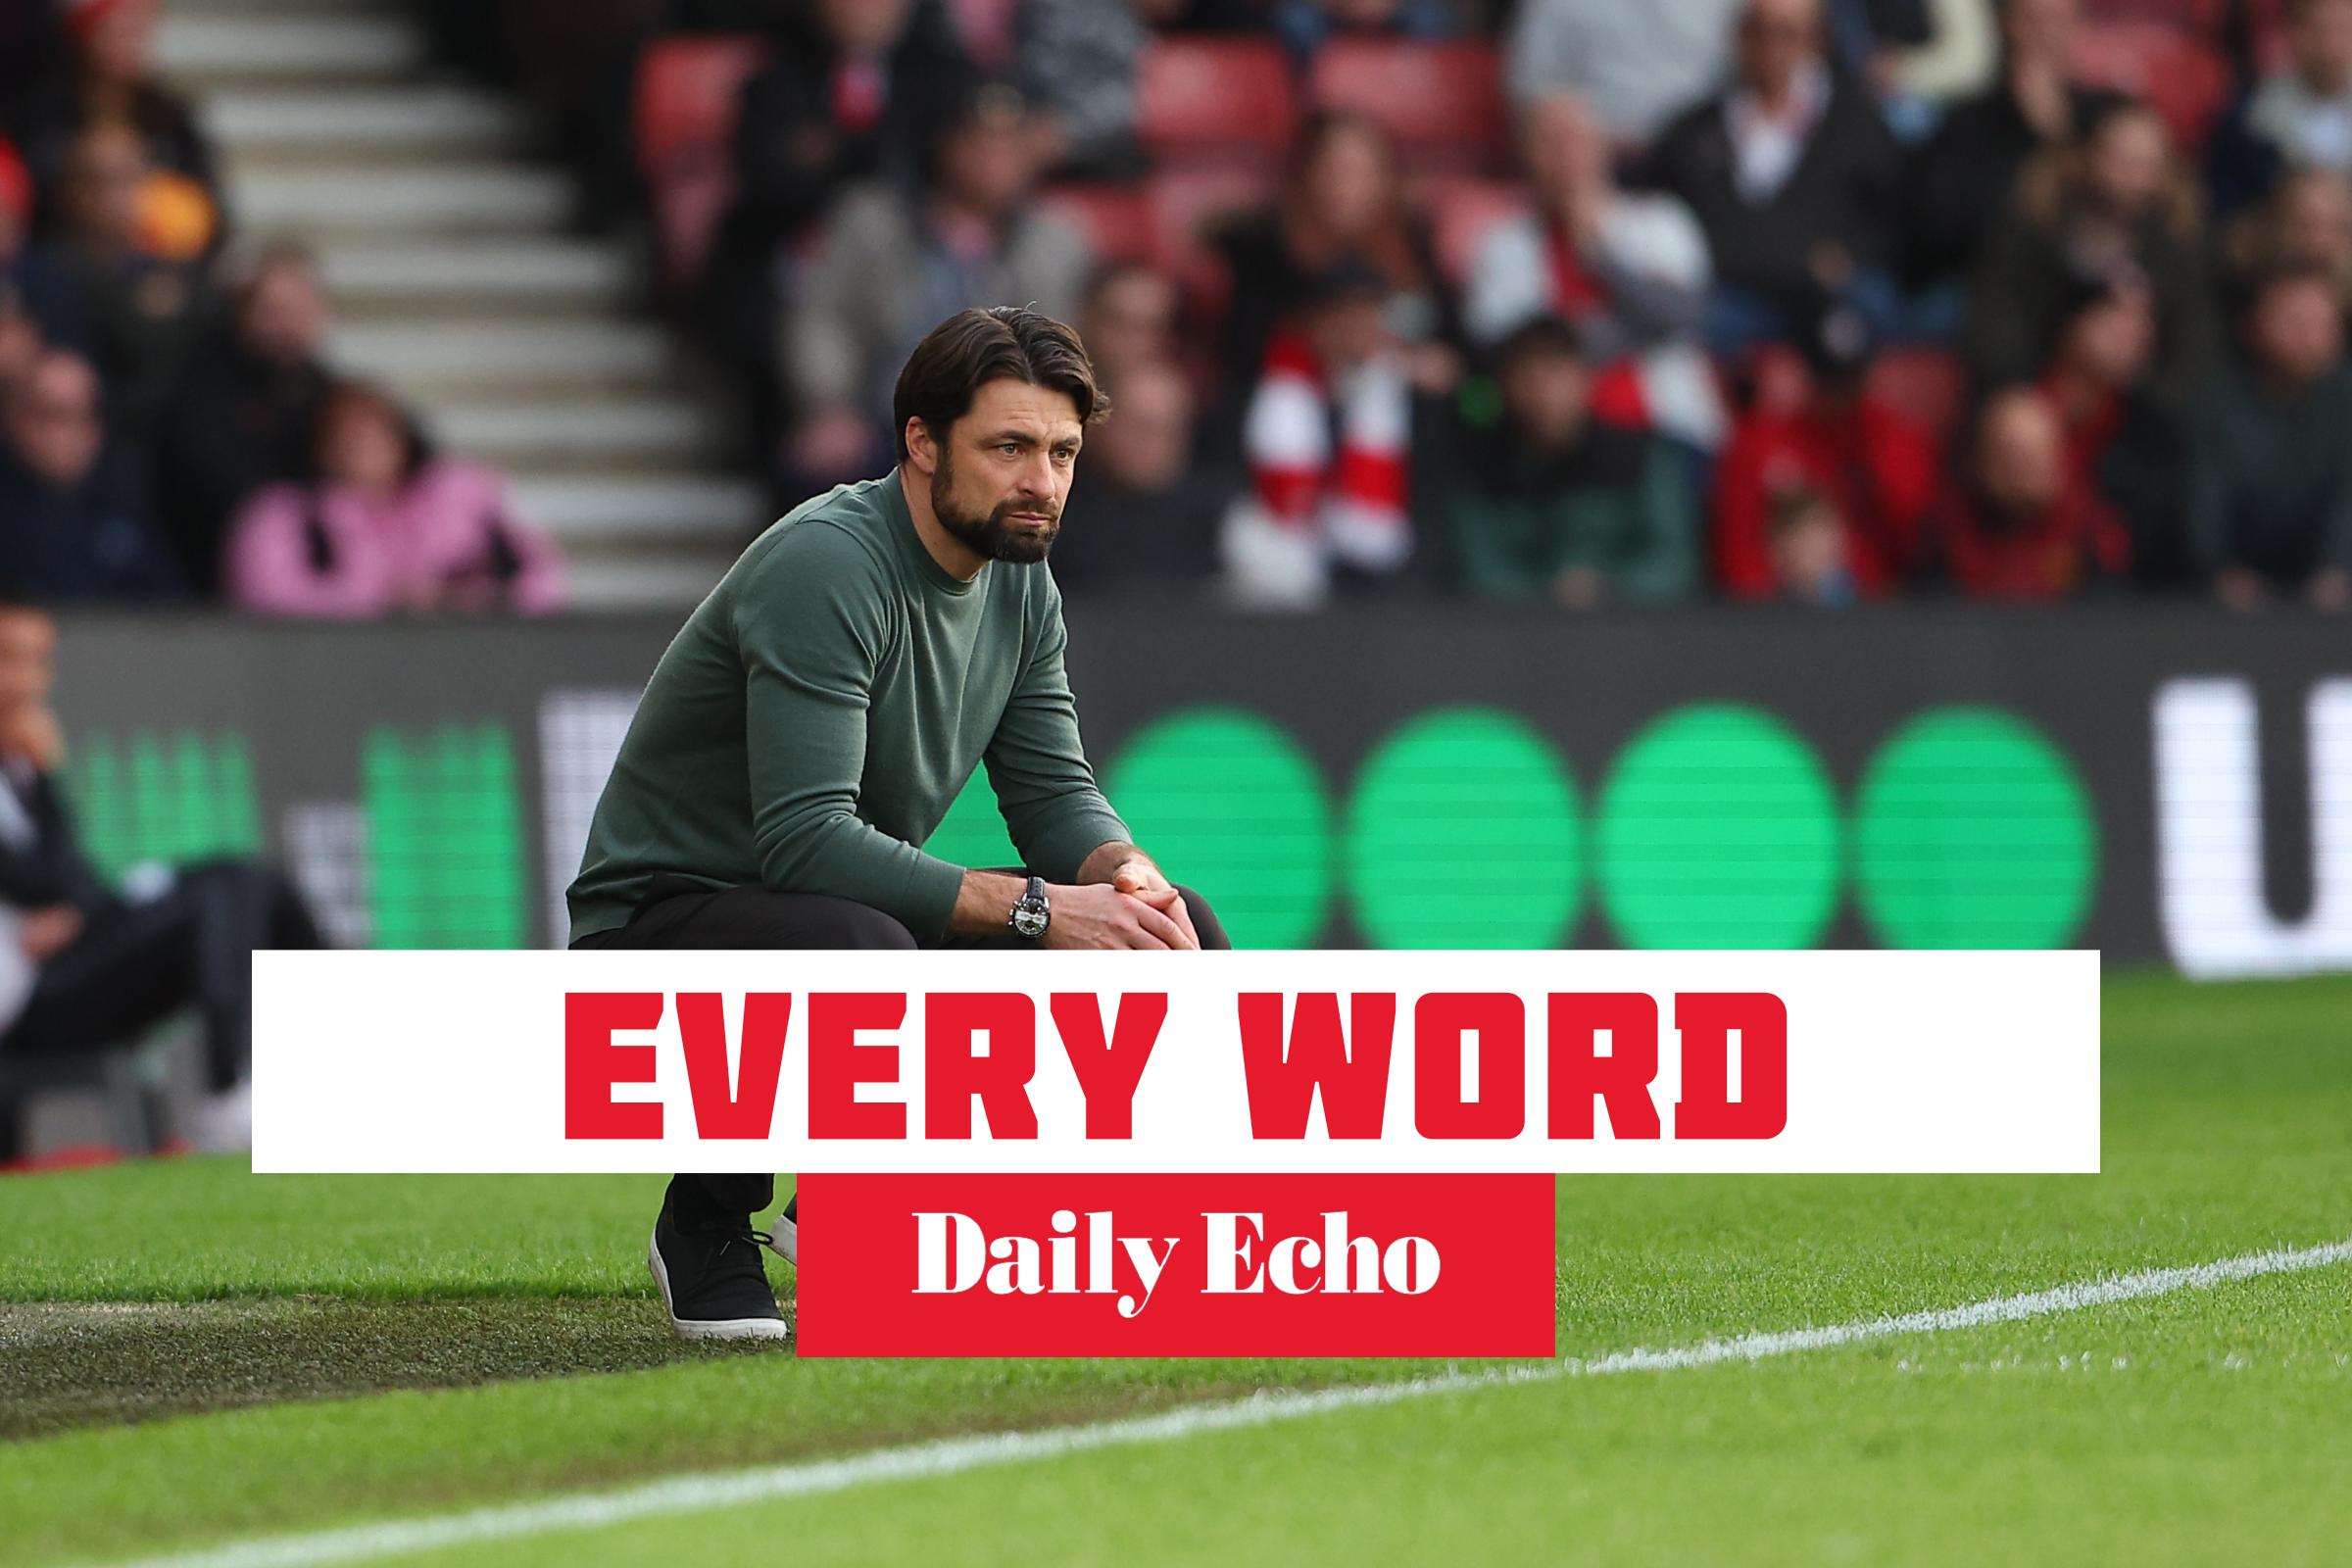 Every word Martin said about Downes, Bristol City and signing Brooks